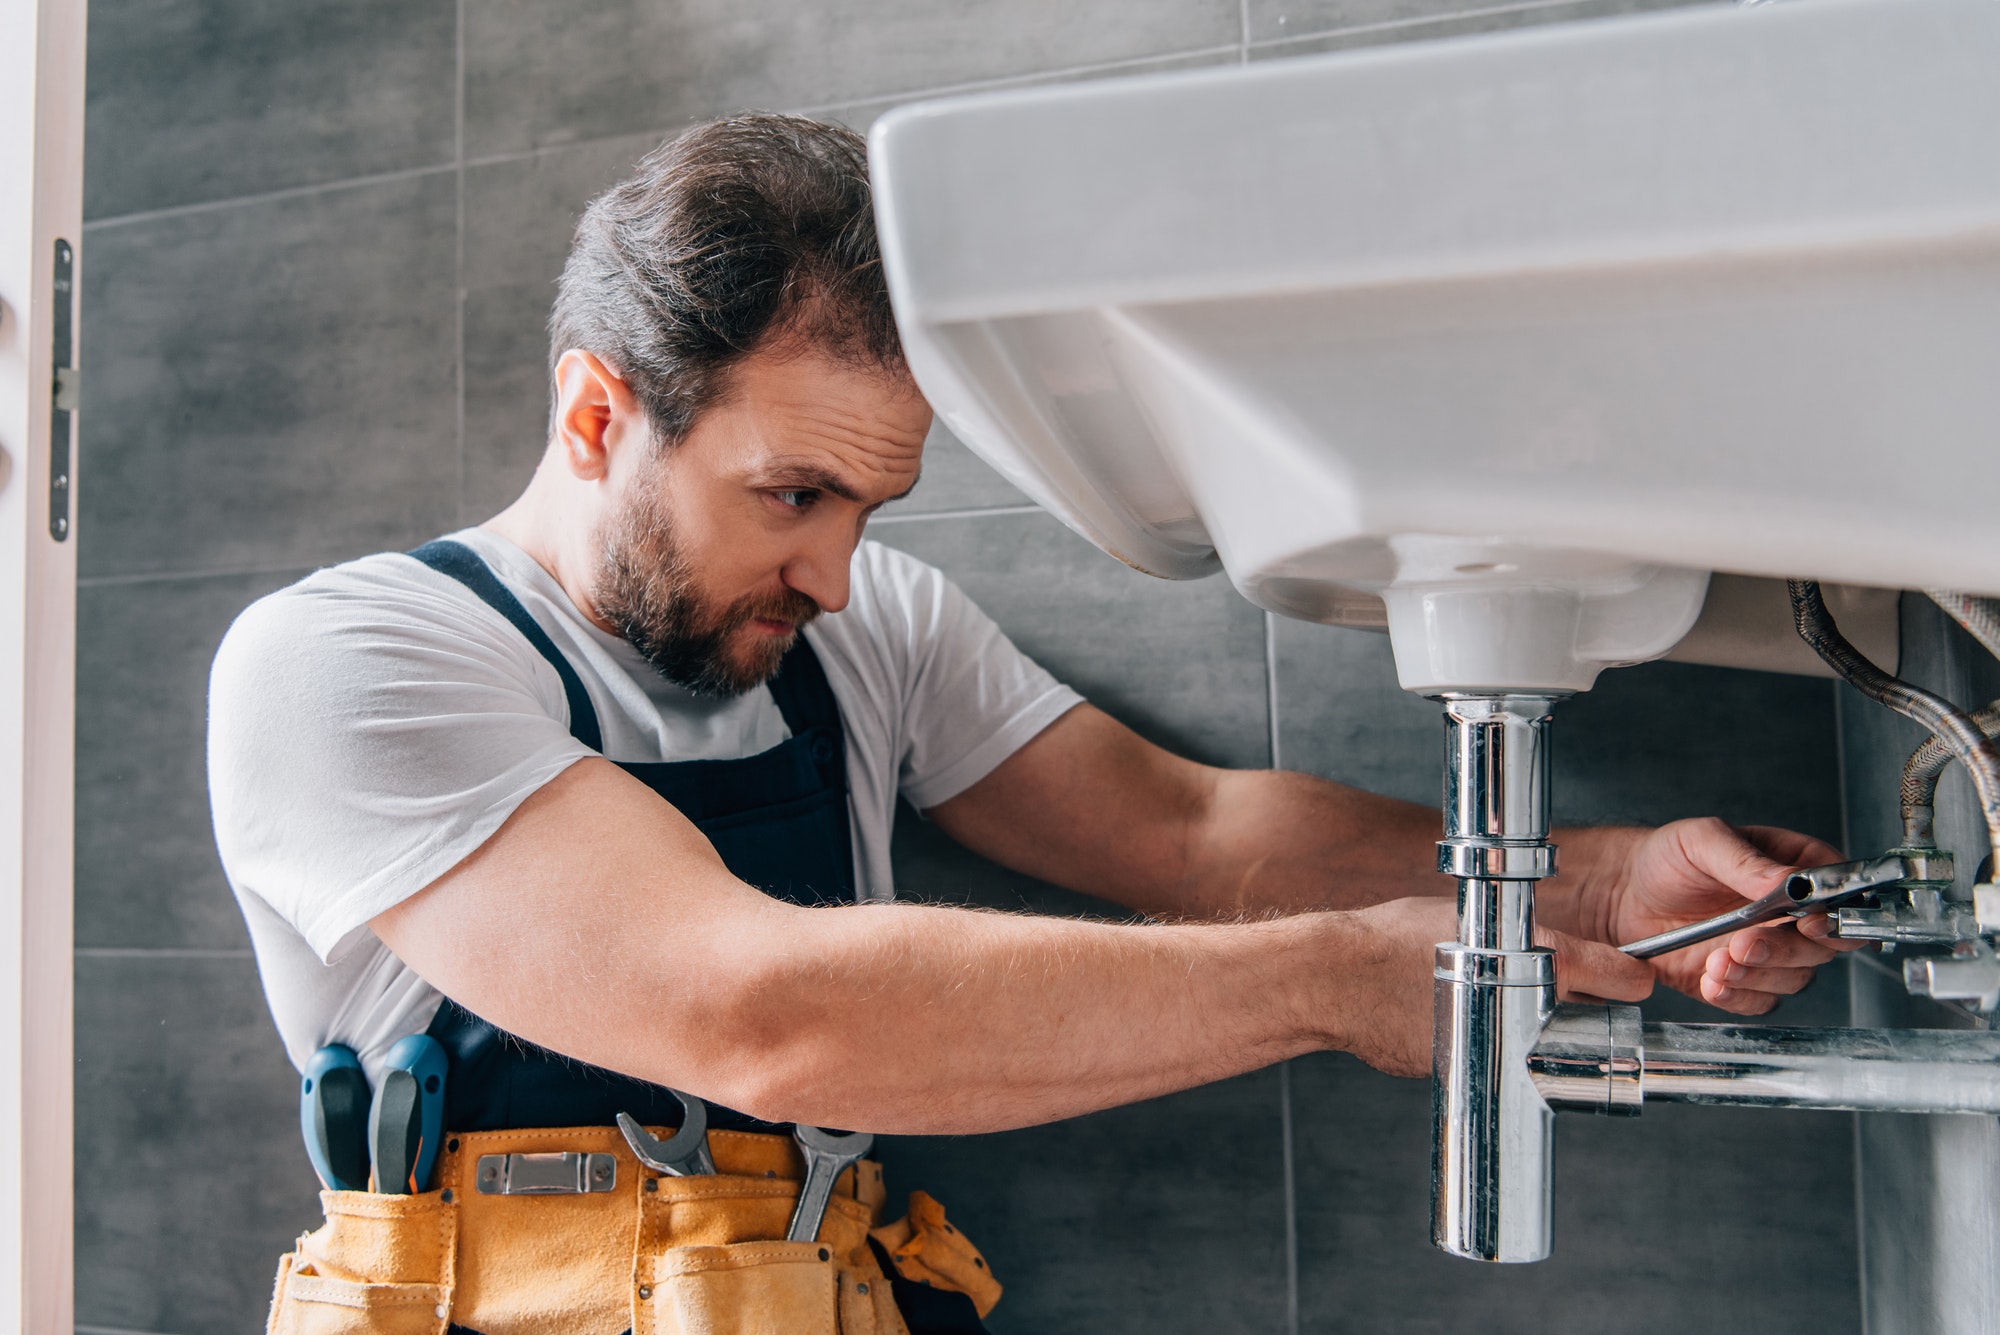 Find The Best Residential Plumbing Services in Key Biscayne FL Area